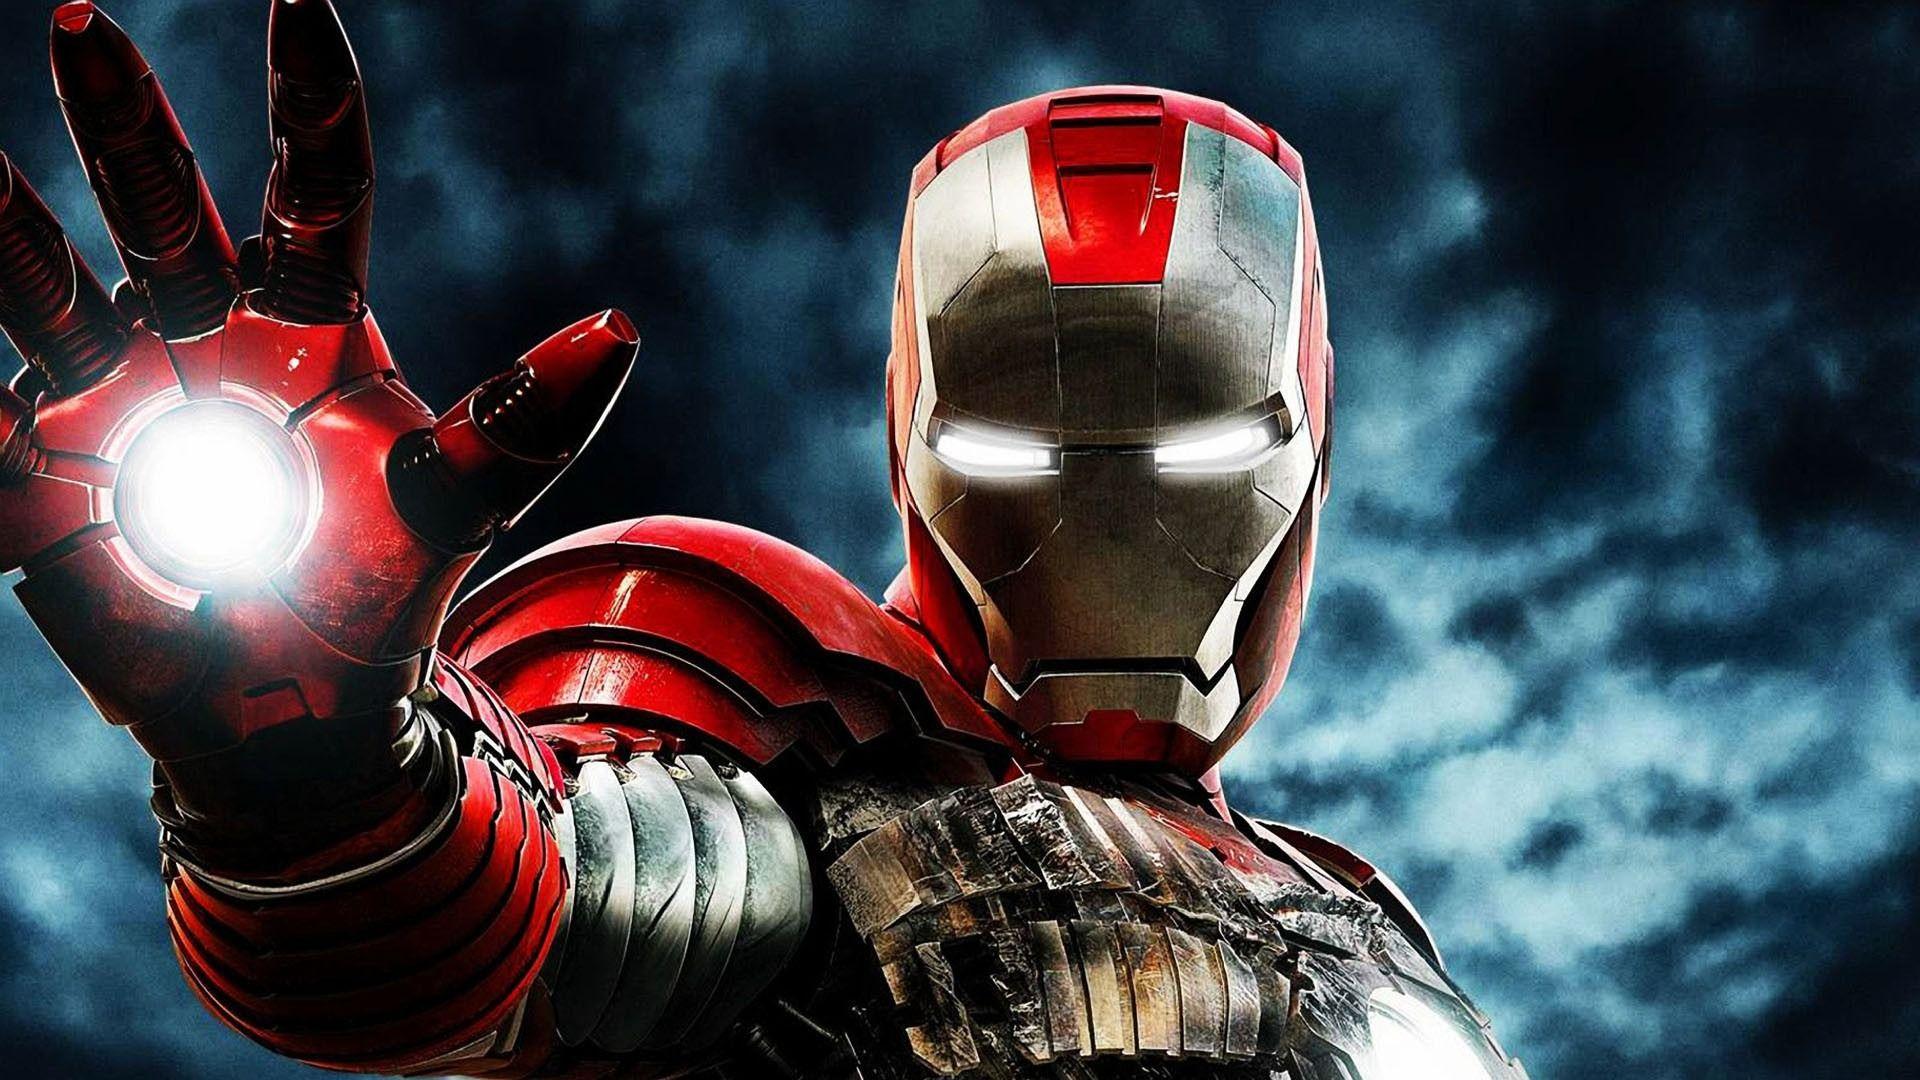 Wallpapers Iron Man Phone With 3 Full Hd 1920x1080 High Resolution Of